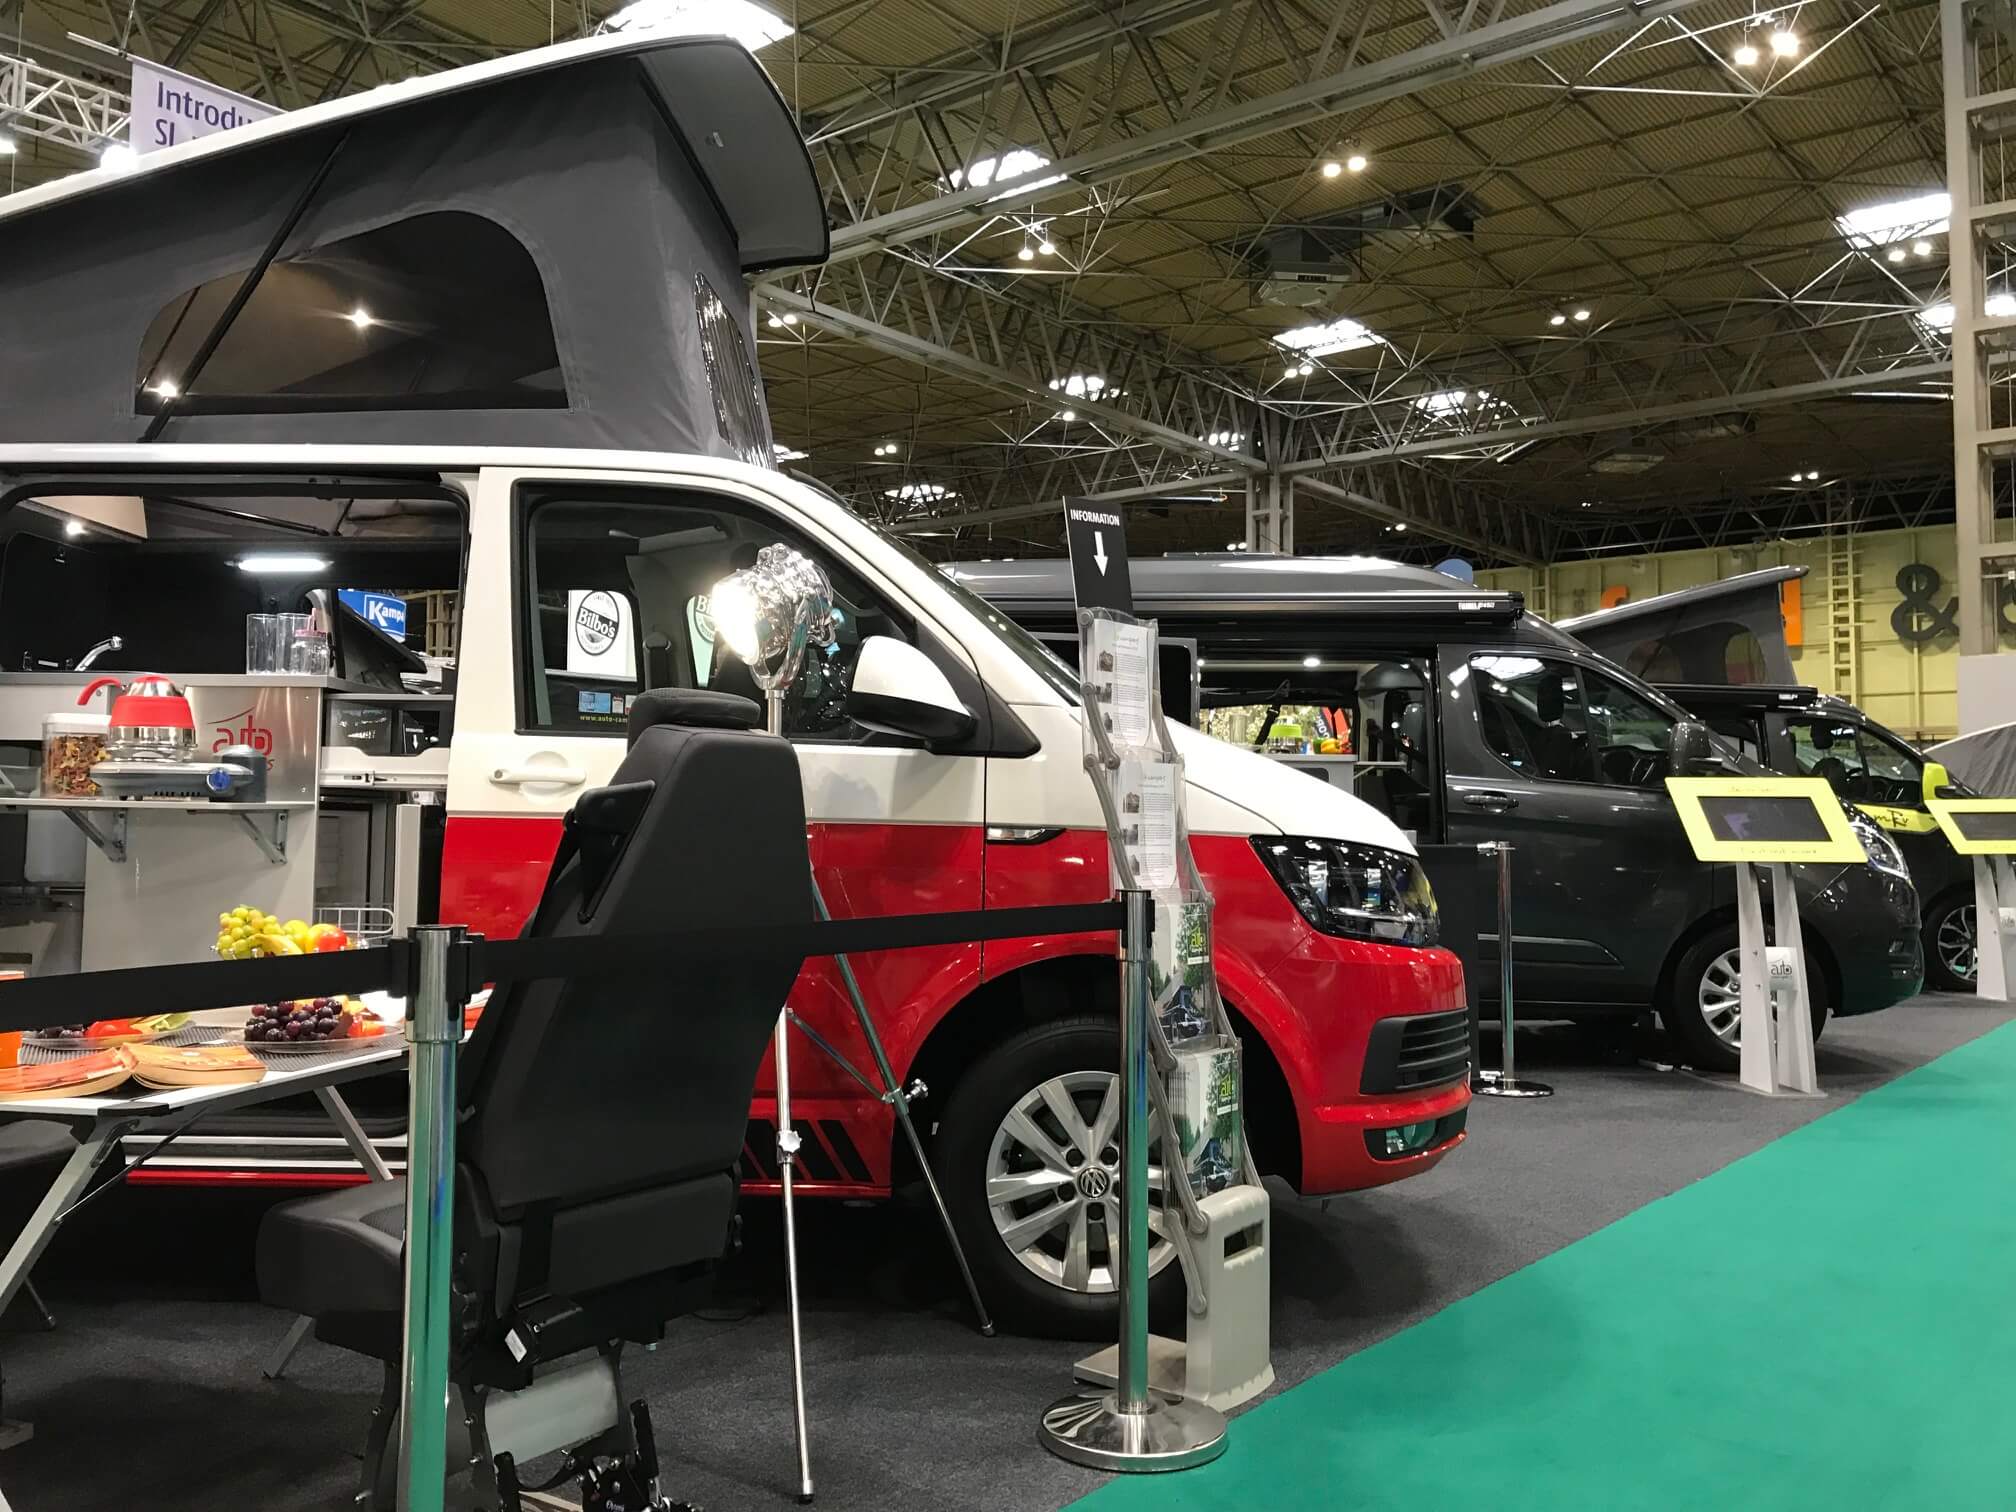 Auto Campers at the NEC